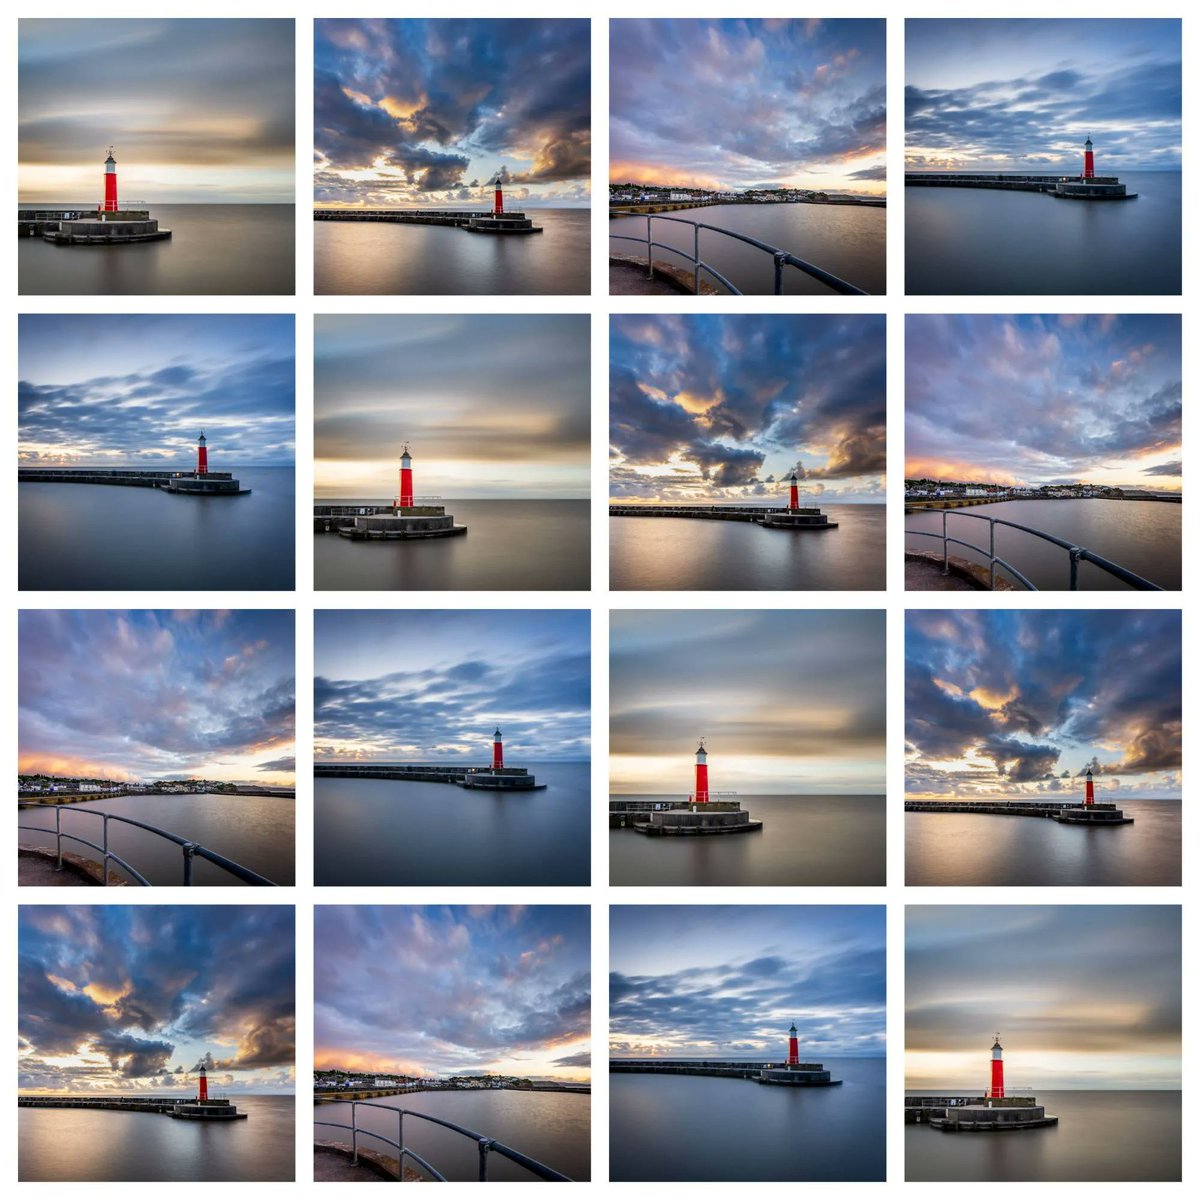 Happy #Saturday! 😀 

Next weeks' daily photo theme a set from just one shoot, showing how the light changes during a single showery sunset - 'Sunset at the lighthouse' starts on Monday....

Have a great weekend! 🎉 

#Devonphotographer #photographylovers #dailyphotos